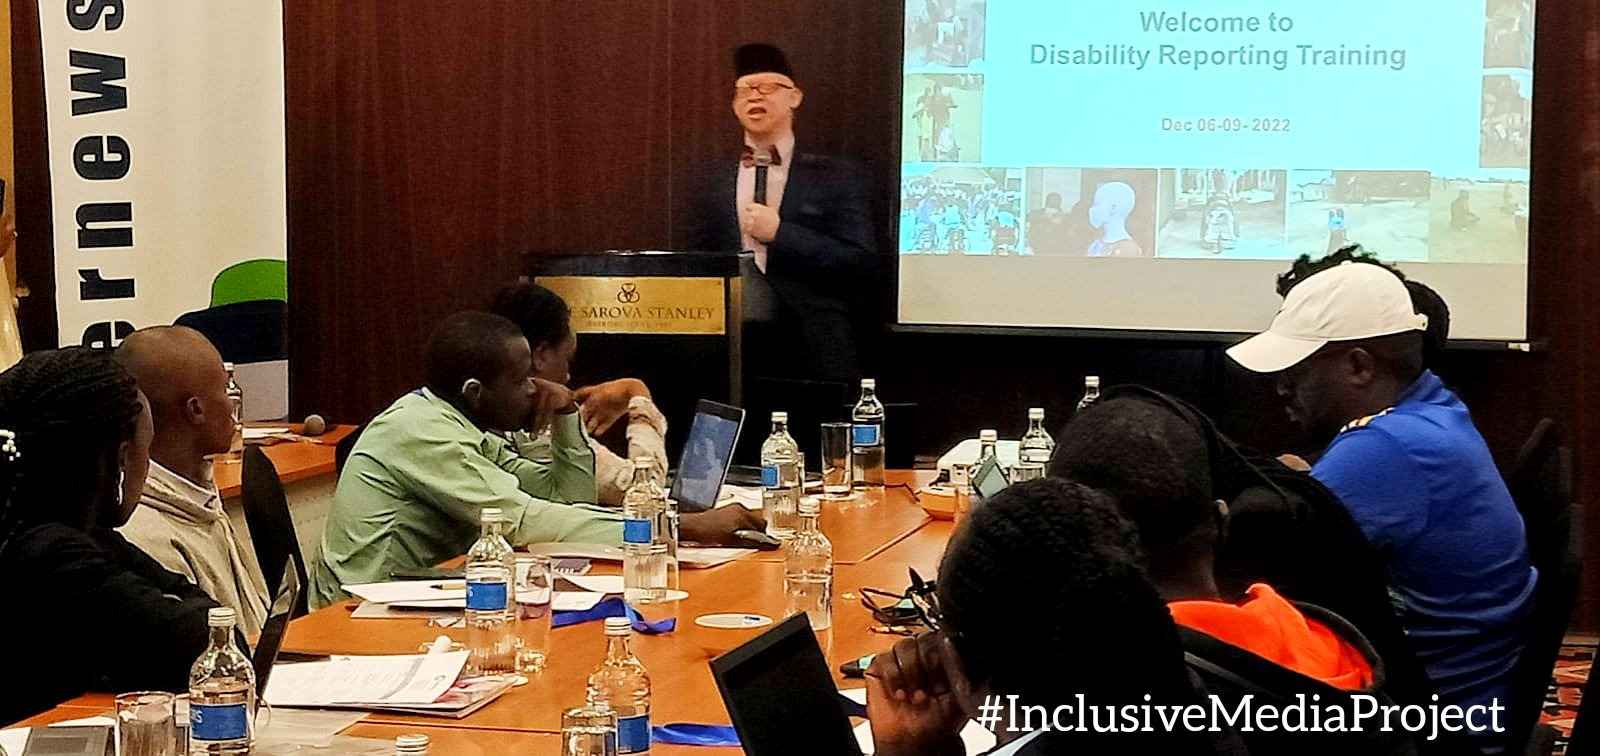 George Ochola attending disability reporting workshop organized by Internews